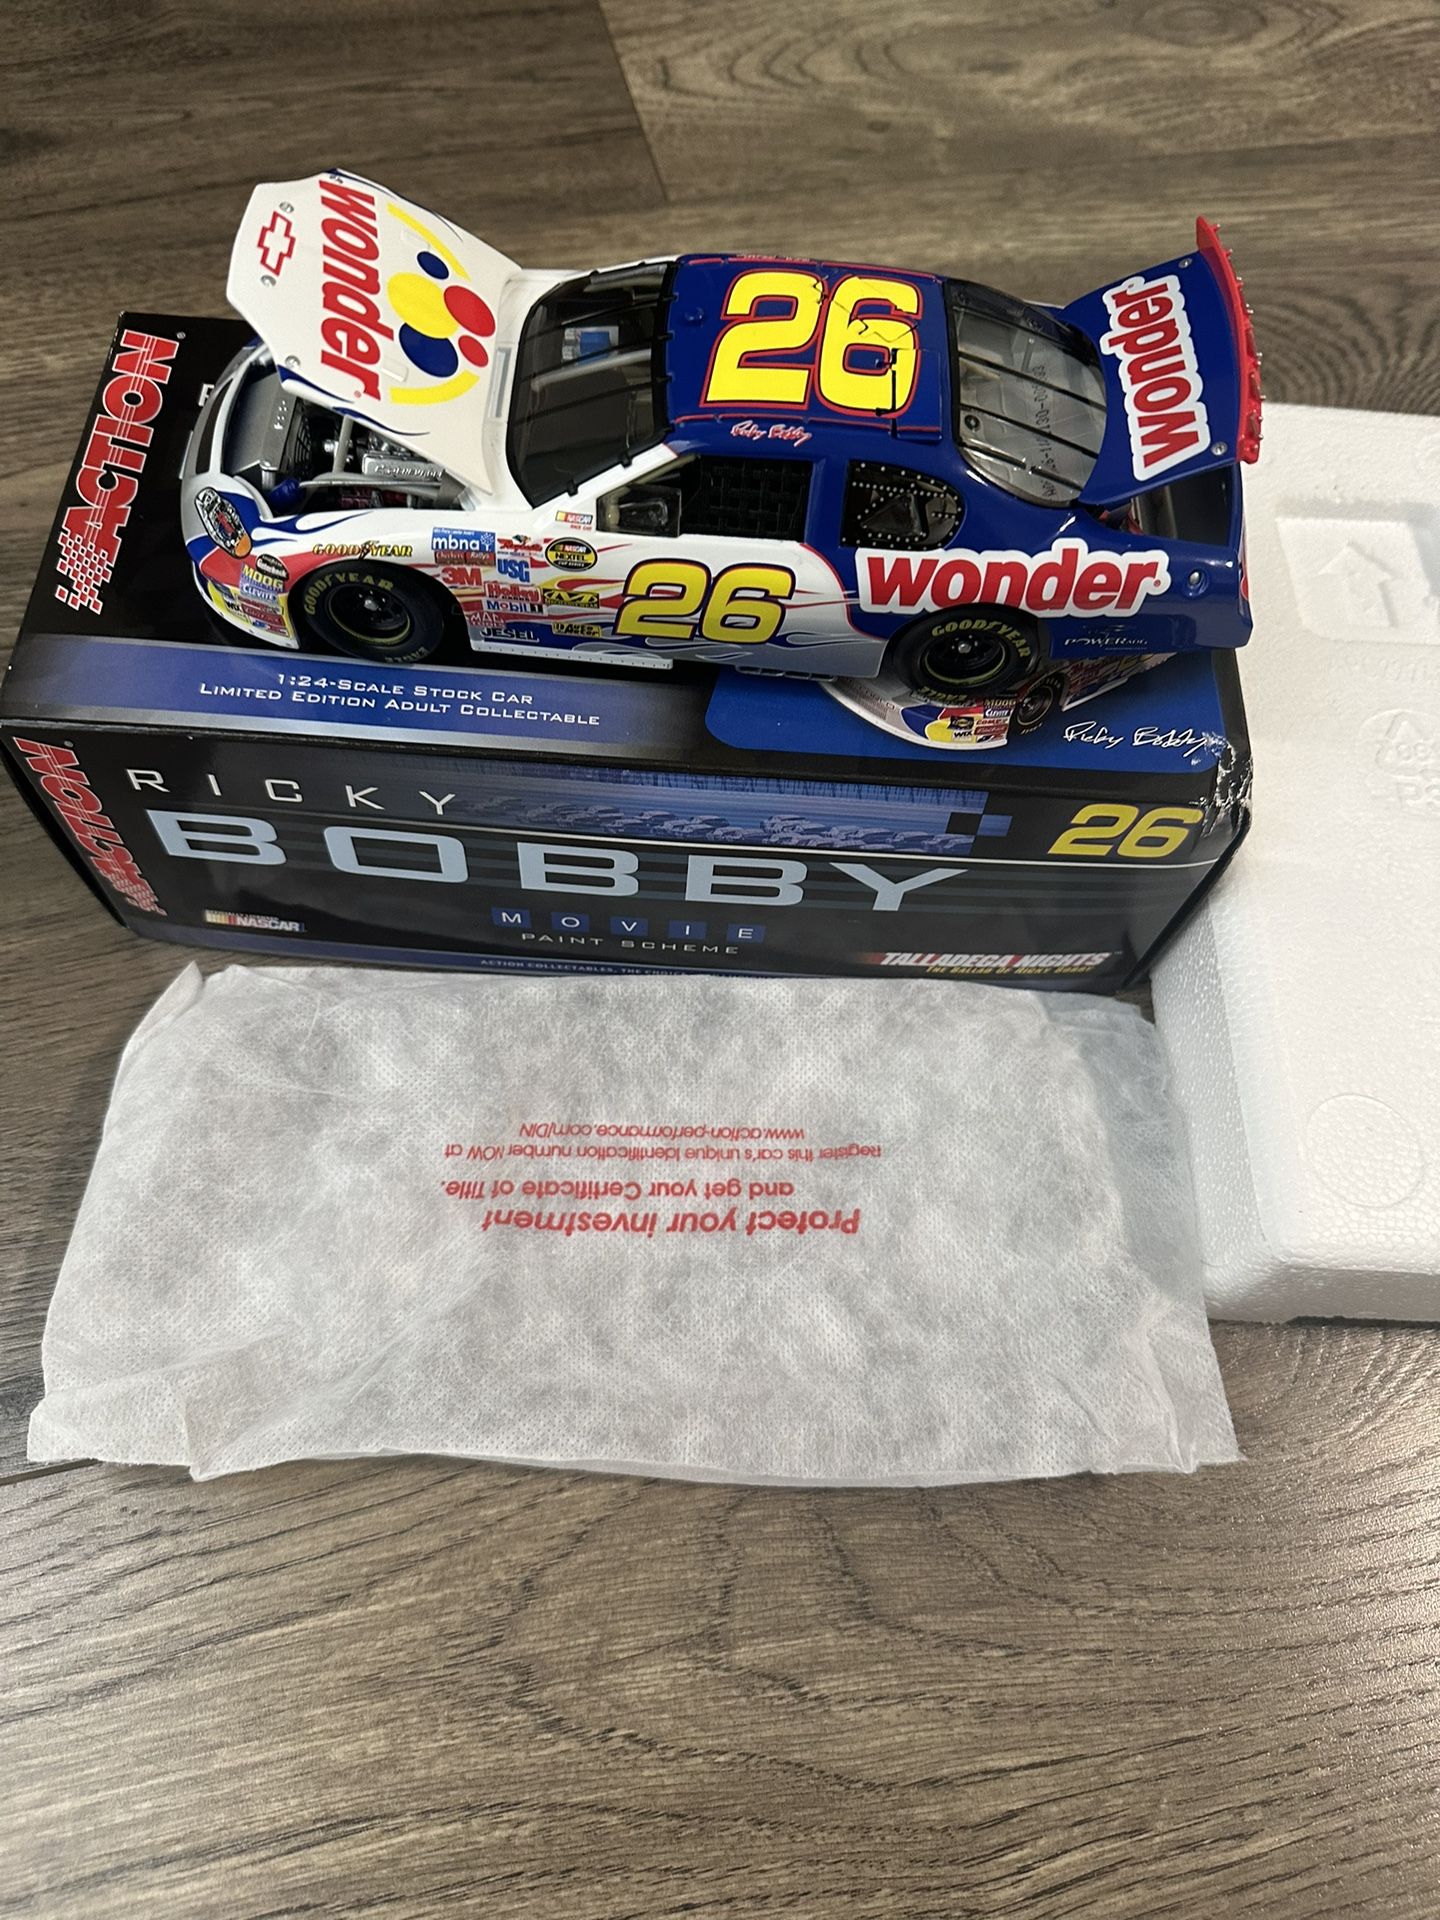 NASCAR Talladega Nights Ricky Bobby # 26, Wonder Bread, 1: 24 scale, die cast, Movie, 1 of 2508 limited edition, Rare, 2005 Monte Carlo Action Racing.